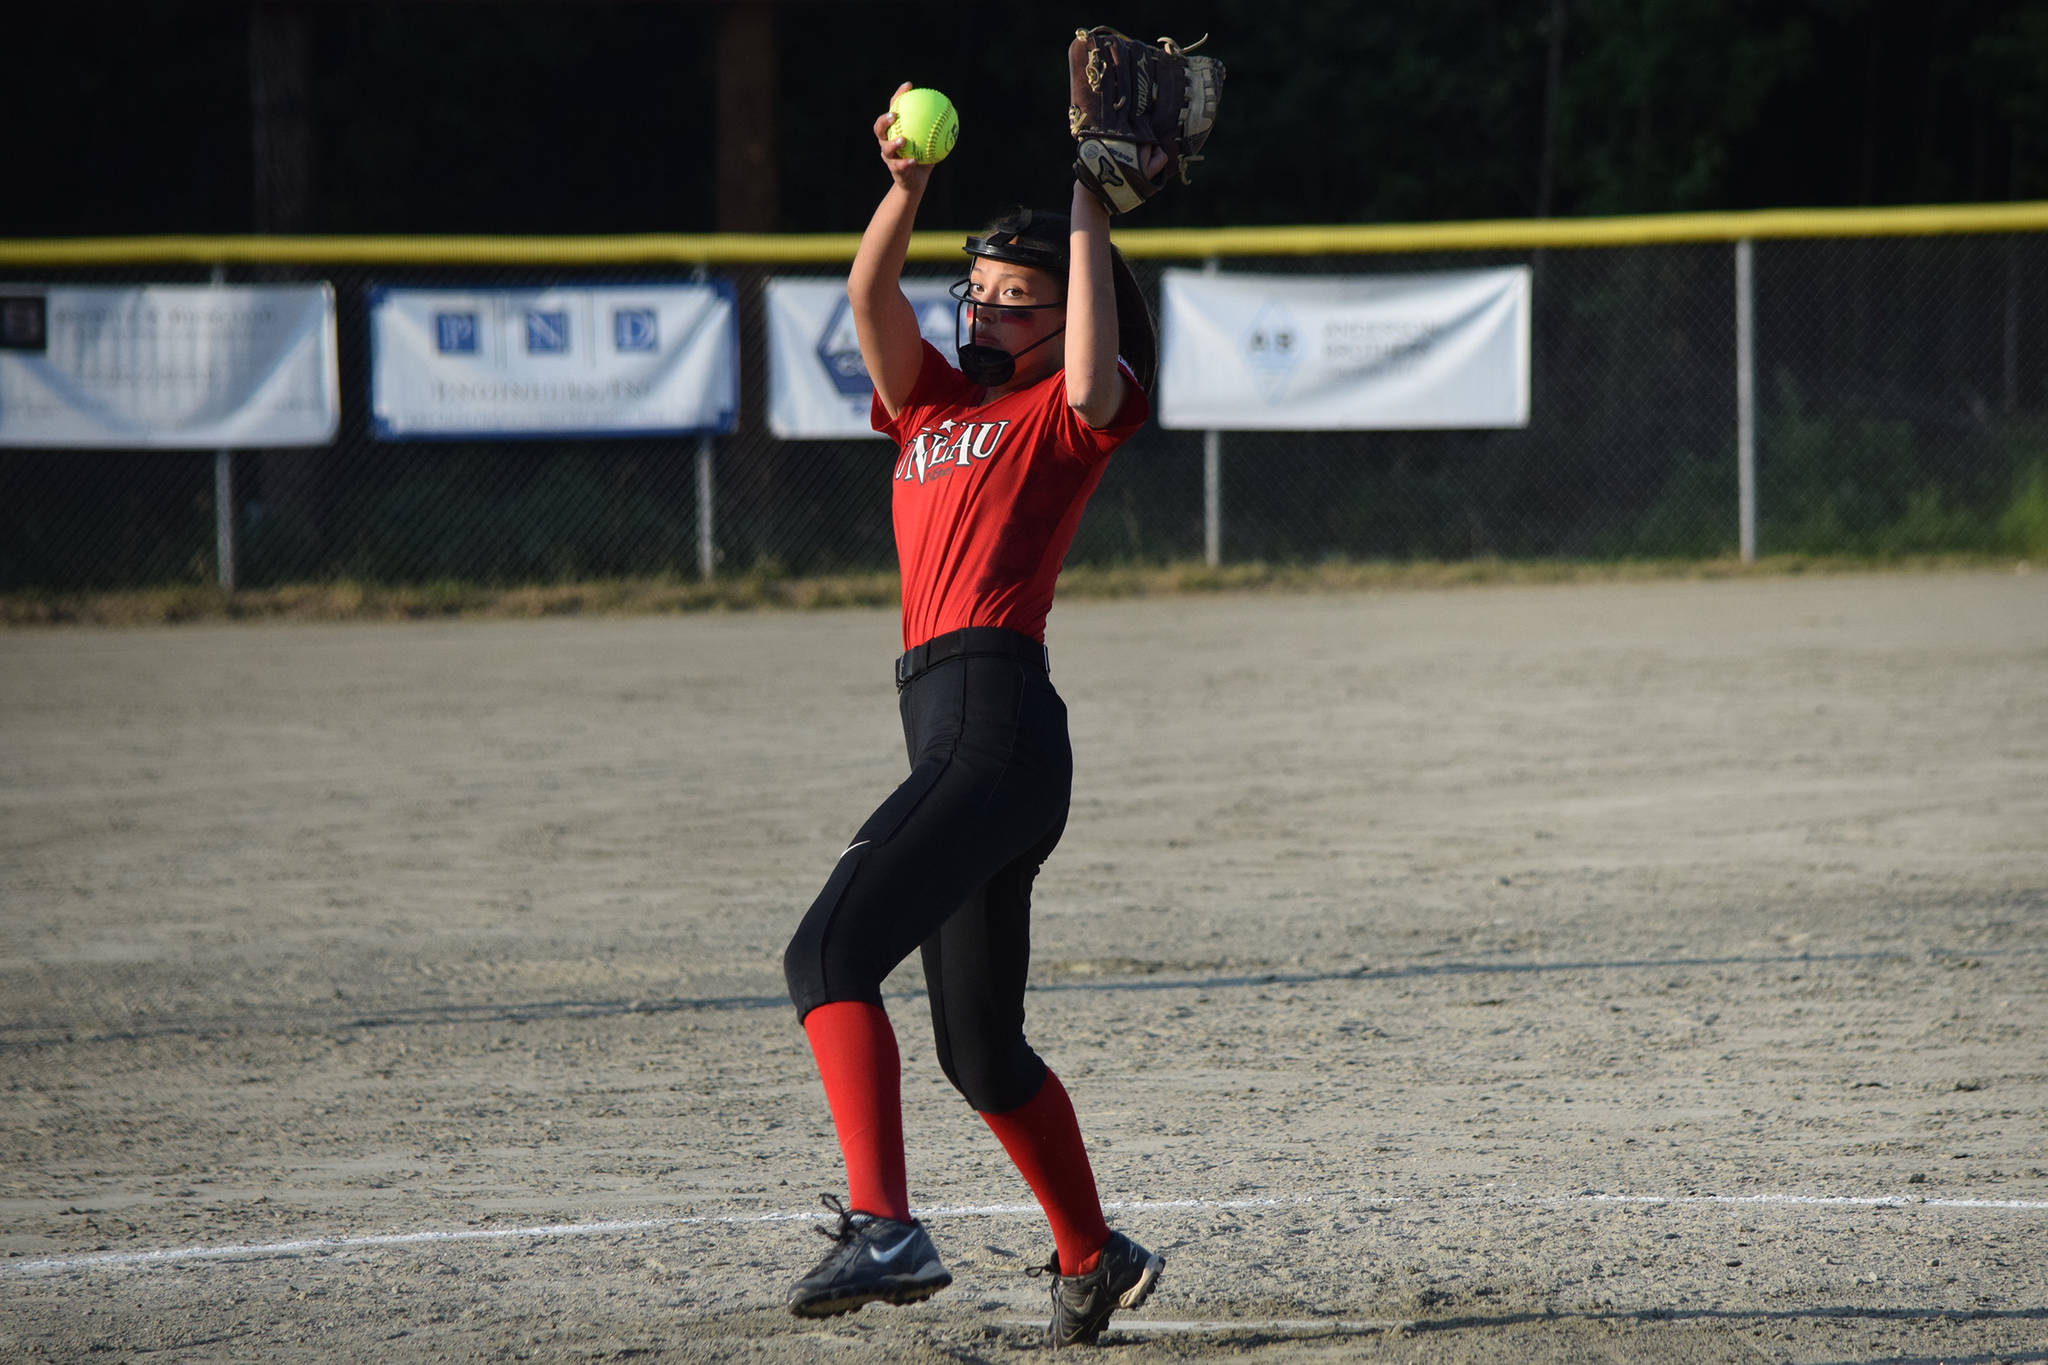 Juneau All-Stars pitcher Kiah Yadao pitches in the first inning against Ketchikan in Game 3 of the Alaska Junior Softball District 2 Tournament at Melvin Park on Wednesday, July 3, 2019. Juneau swept the best-of-five-game series, winning 17-16 on Tuesday and 14-4 and 11-0 in a doubleheader on Wednesday. (Nolin Ainsworth | Juneau Empire)